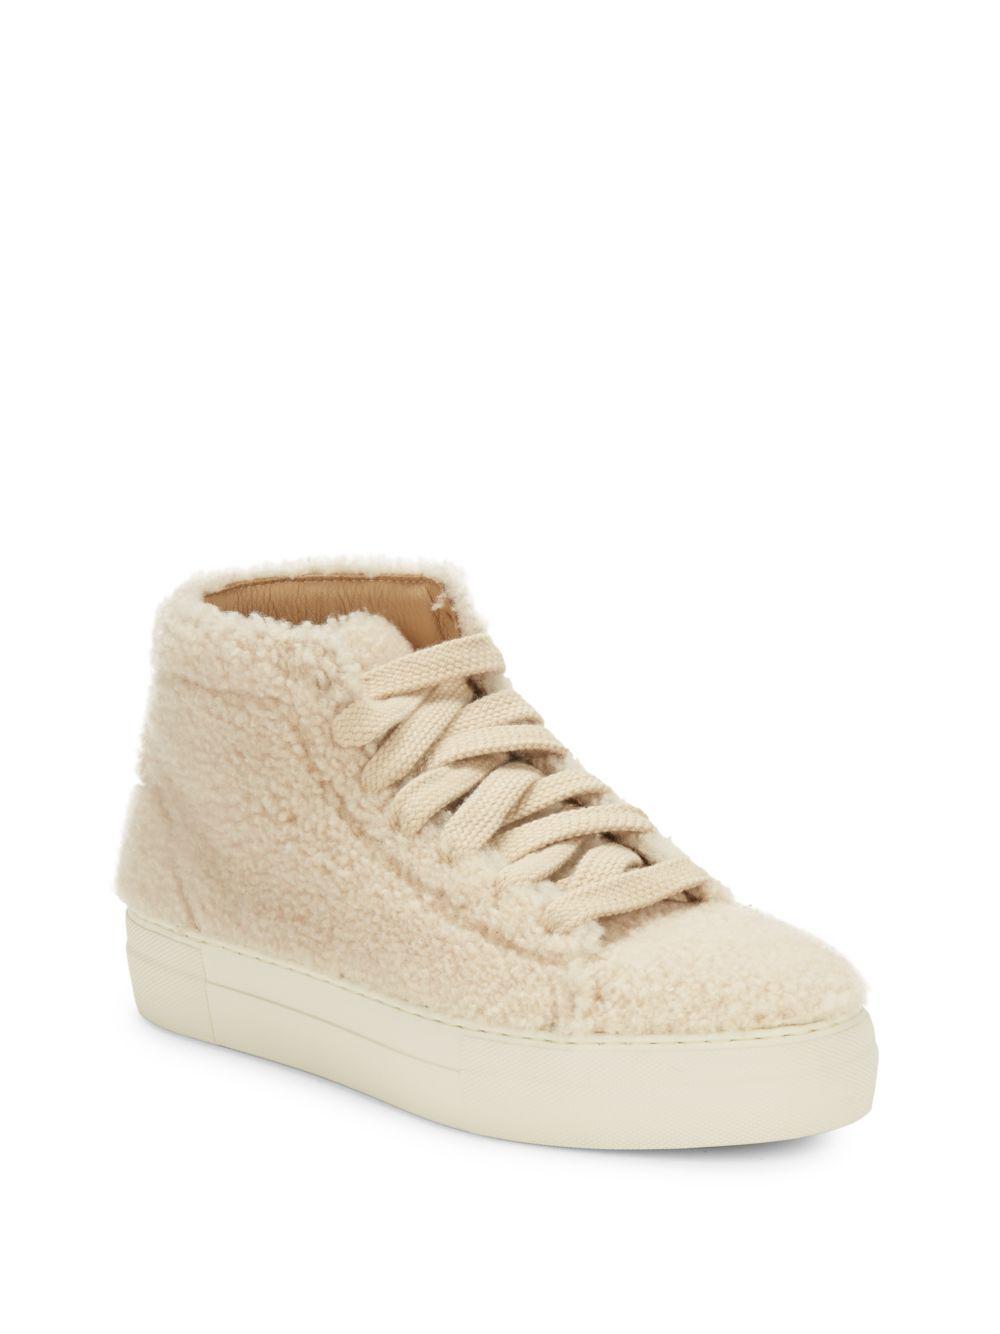 Helmut Leather Hi-top Shearling Sneakers in Cream (Natural) -